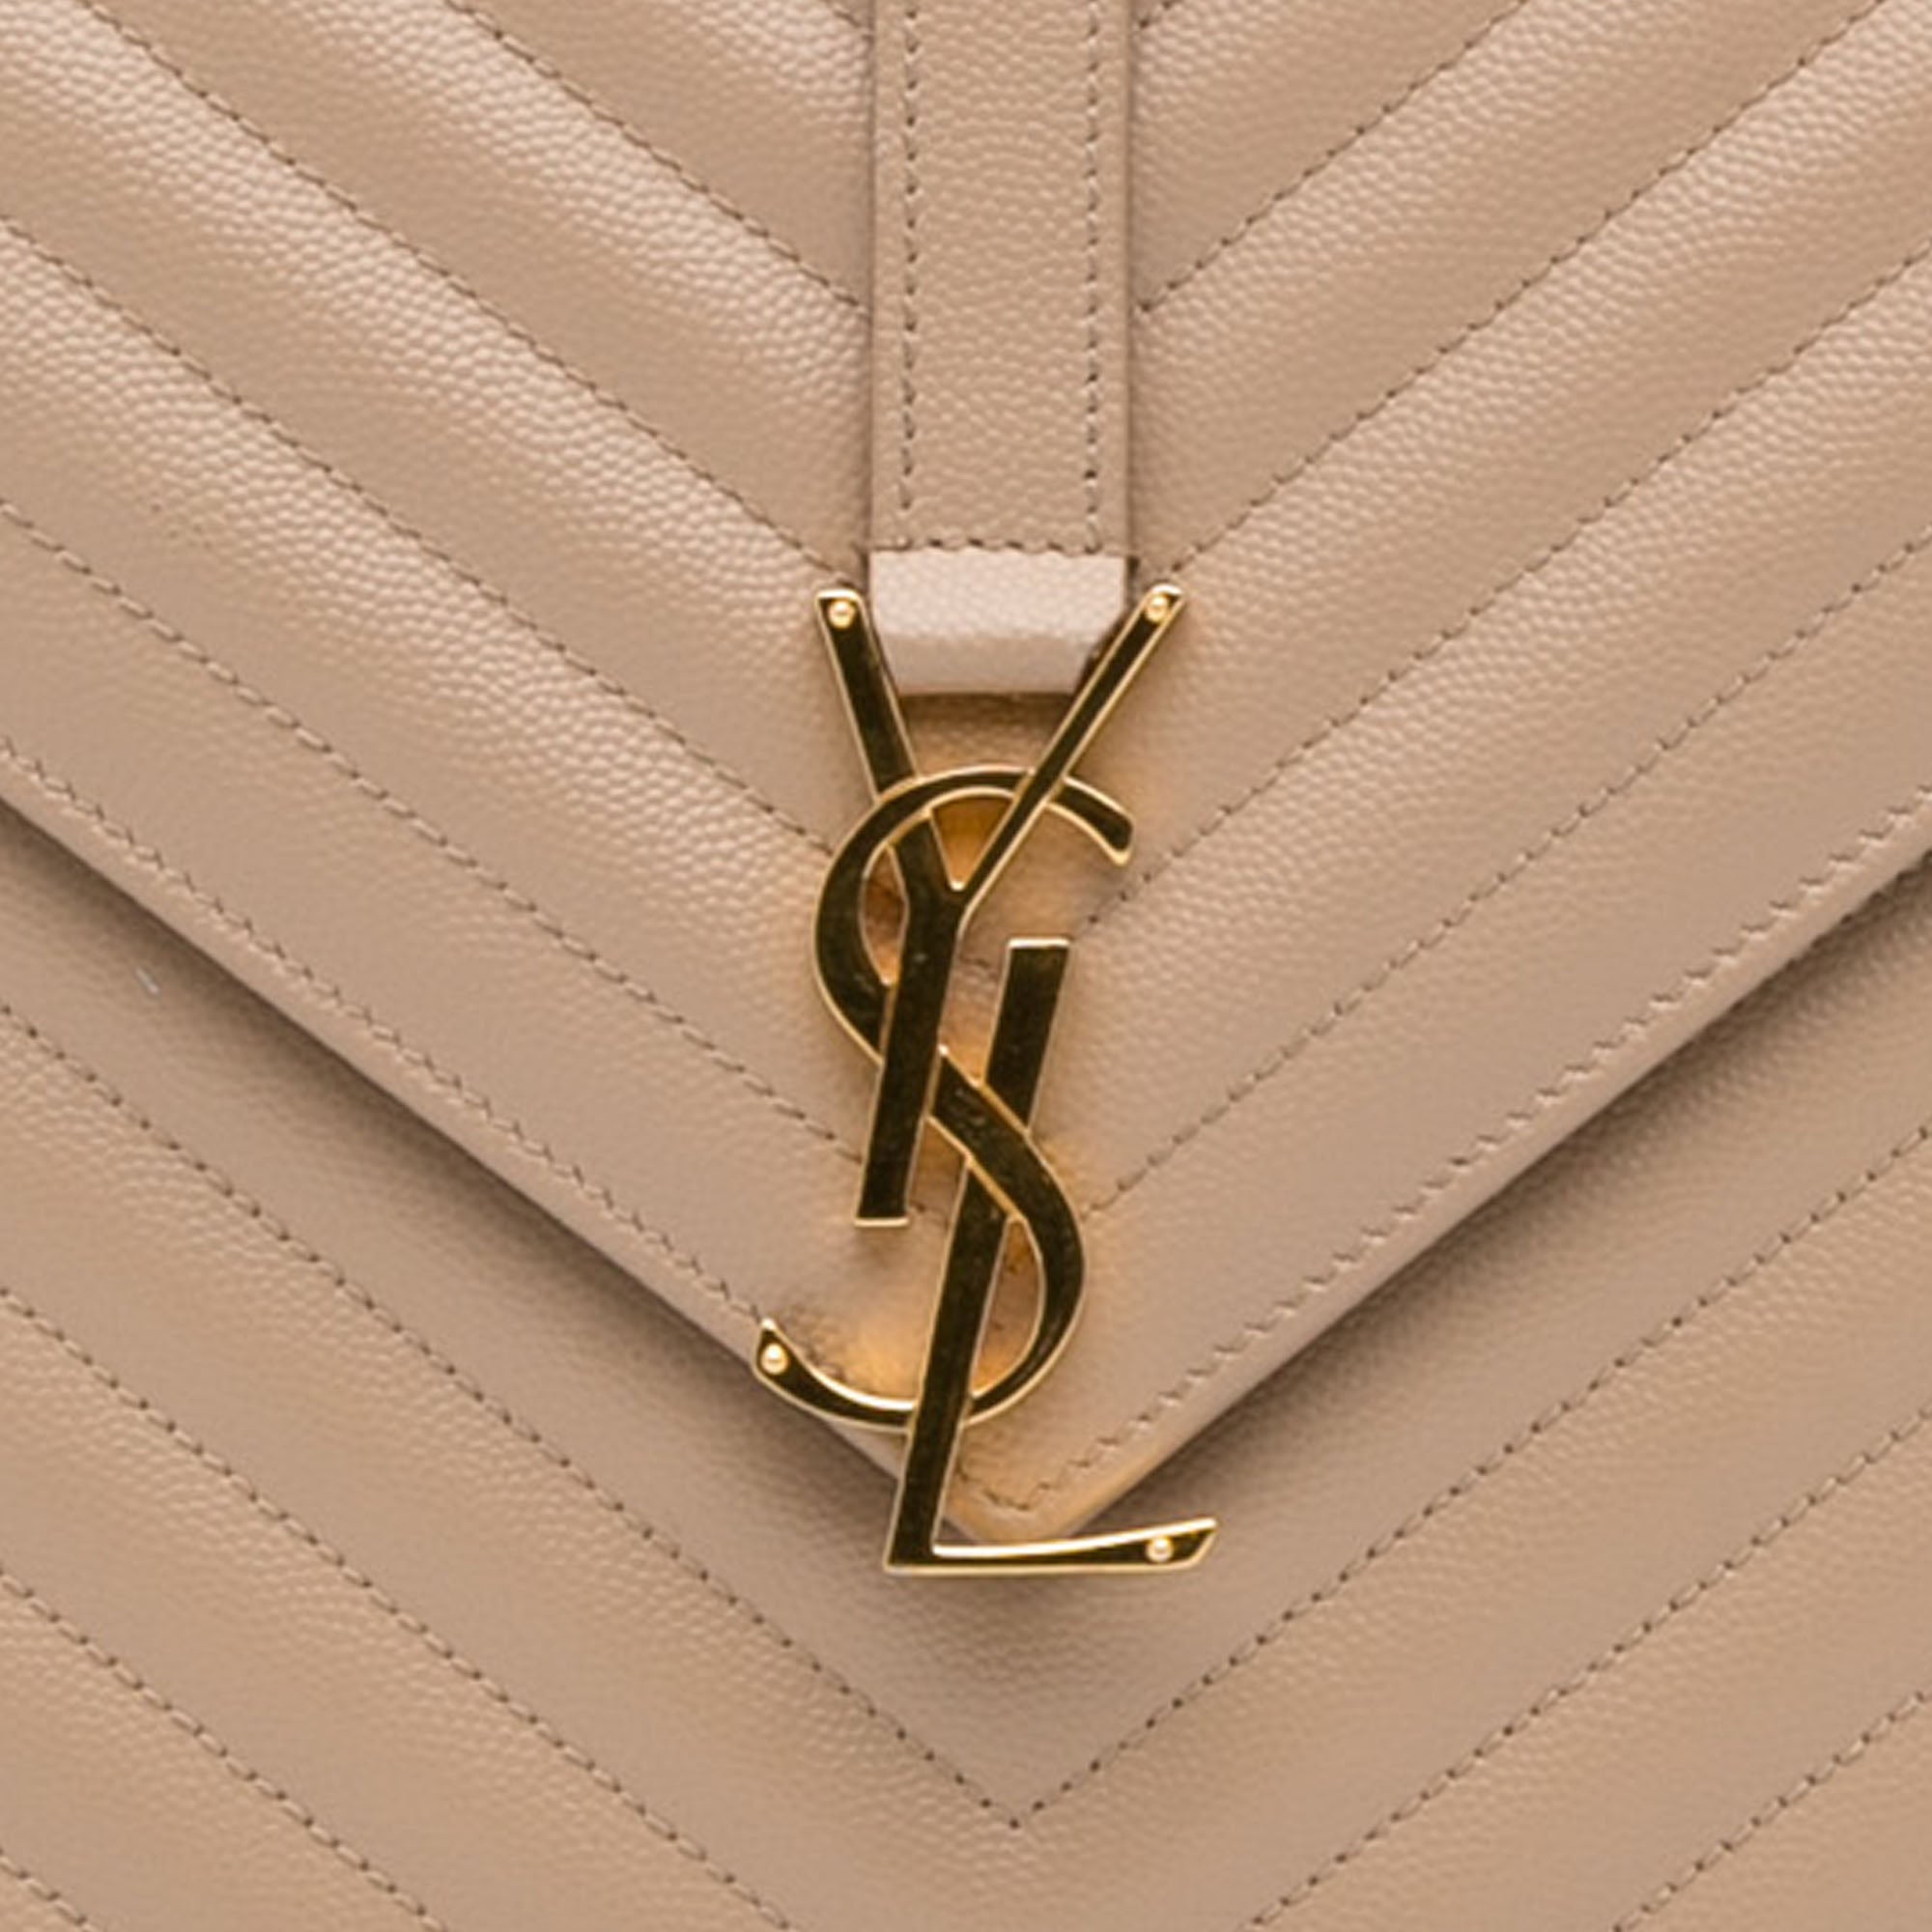 Yves Saint Laurent Beige Chevron Quilted Grained Leather Envelope